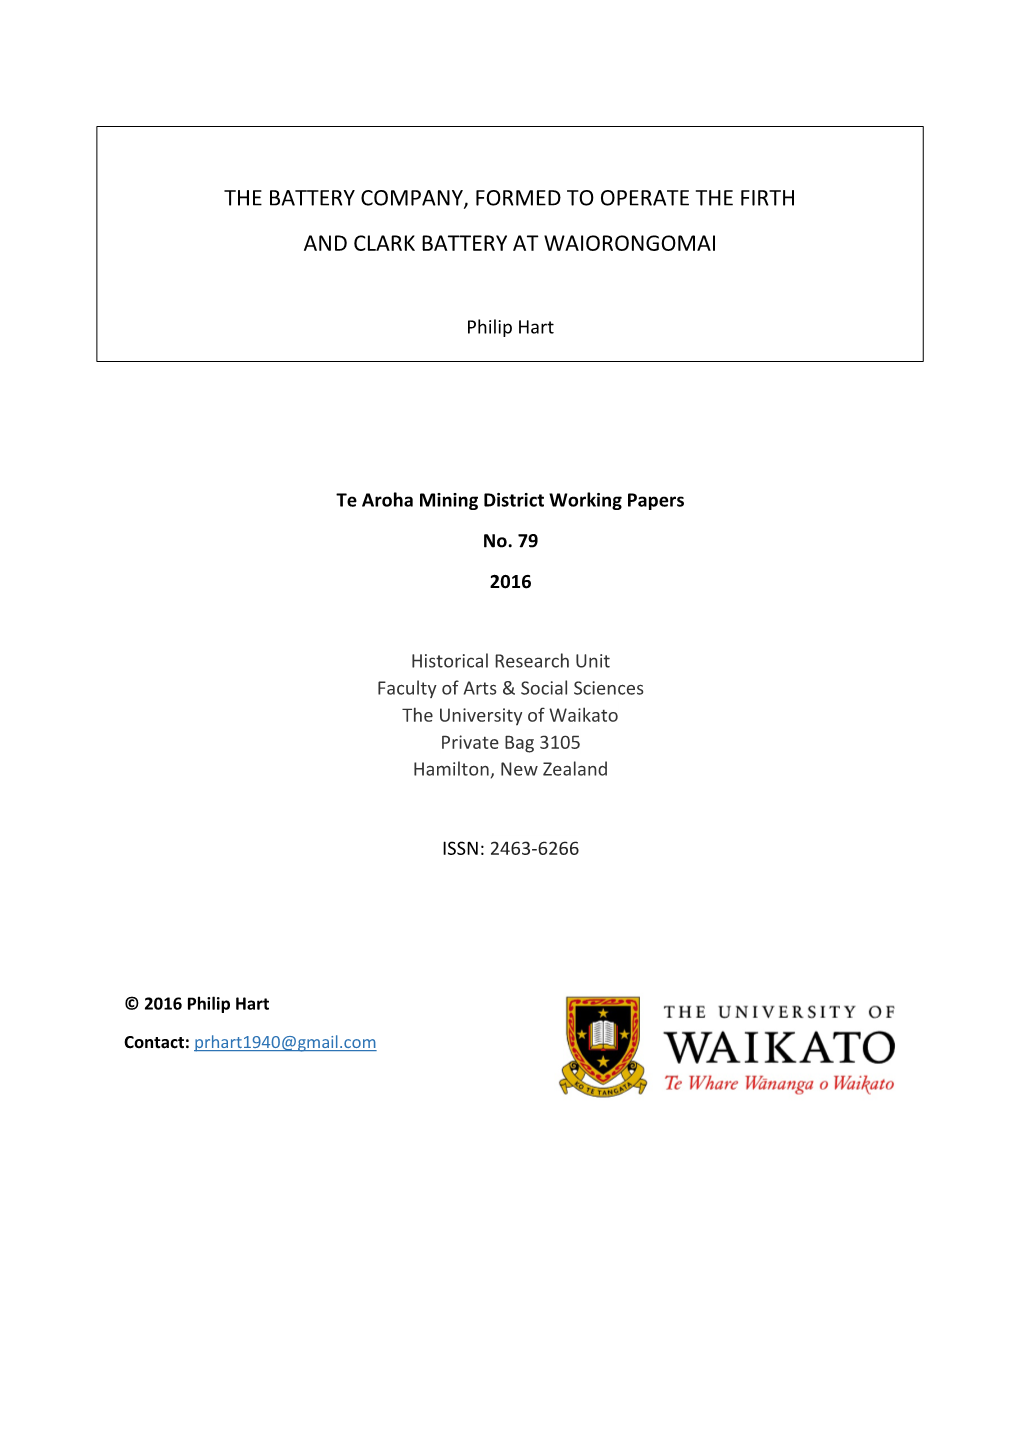 Battery Company, Formed to Operate the Firth and Clark Battery at Waiorongomai